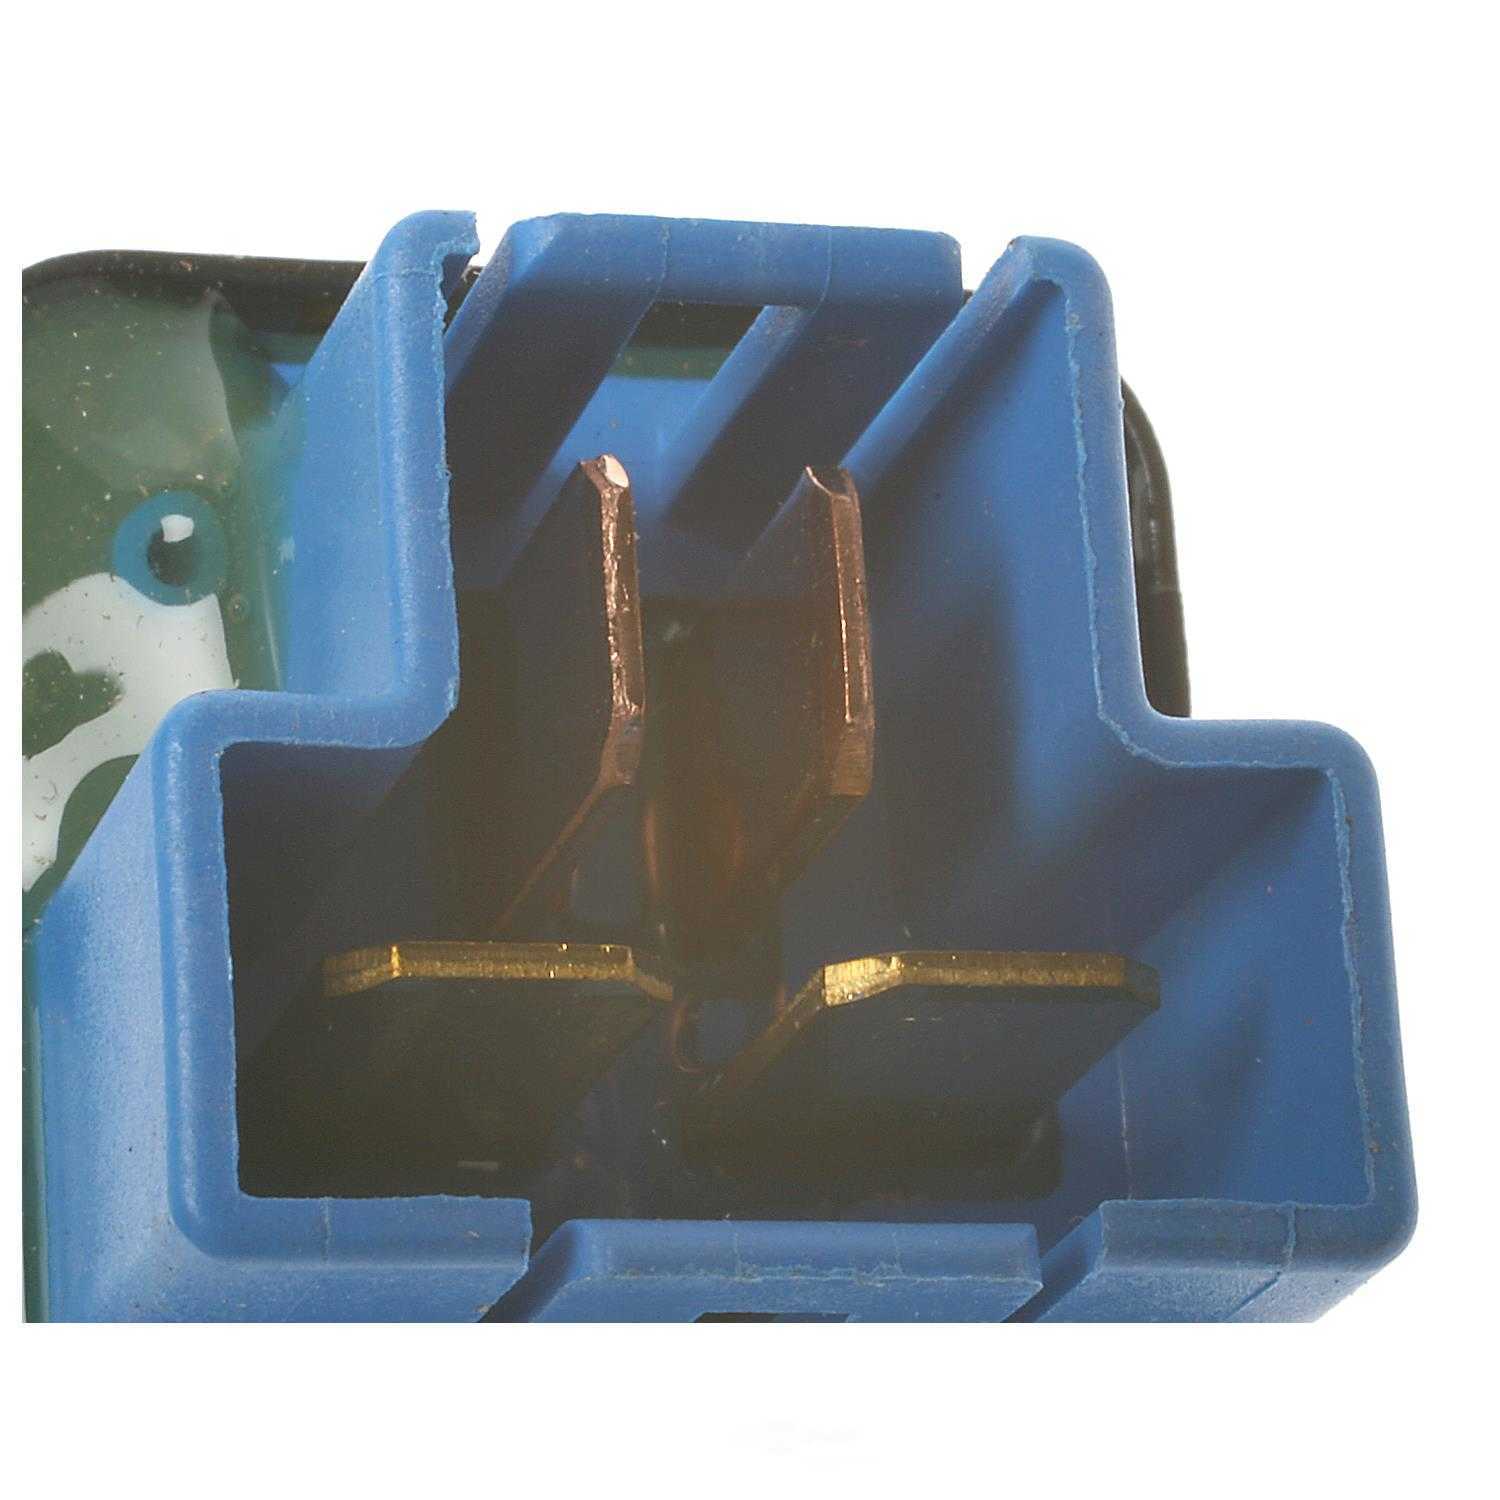 STANDARD MOTOR PRODUCTS - Multi Purpose Relay - STA RY-342